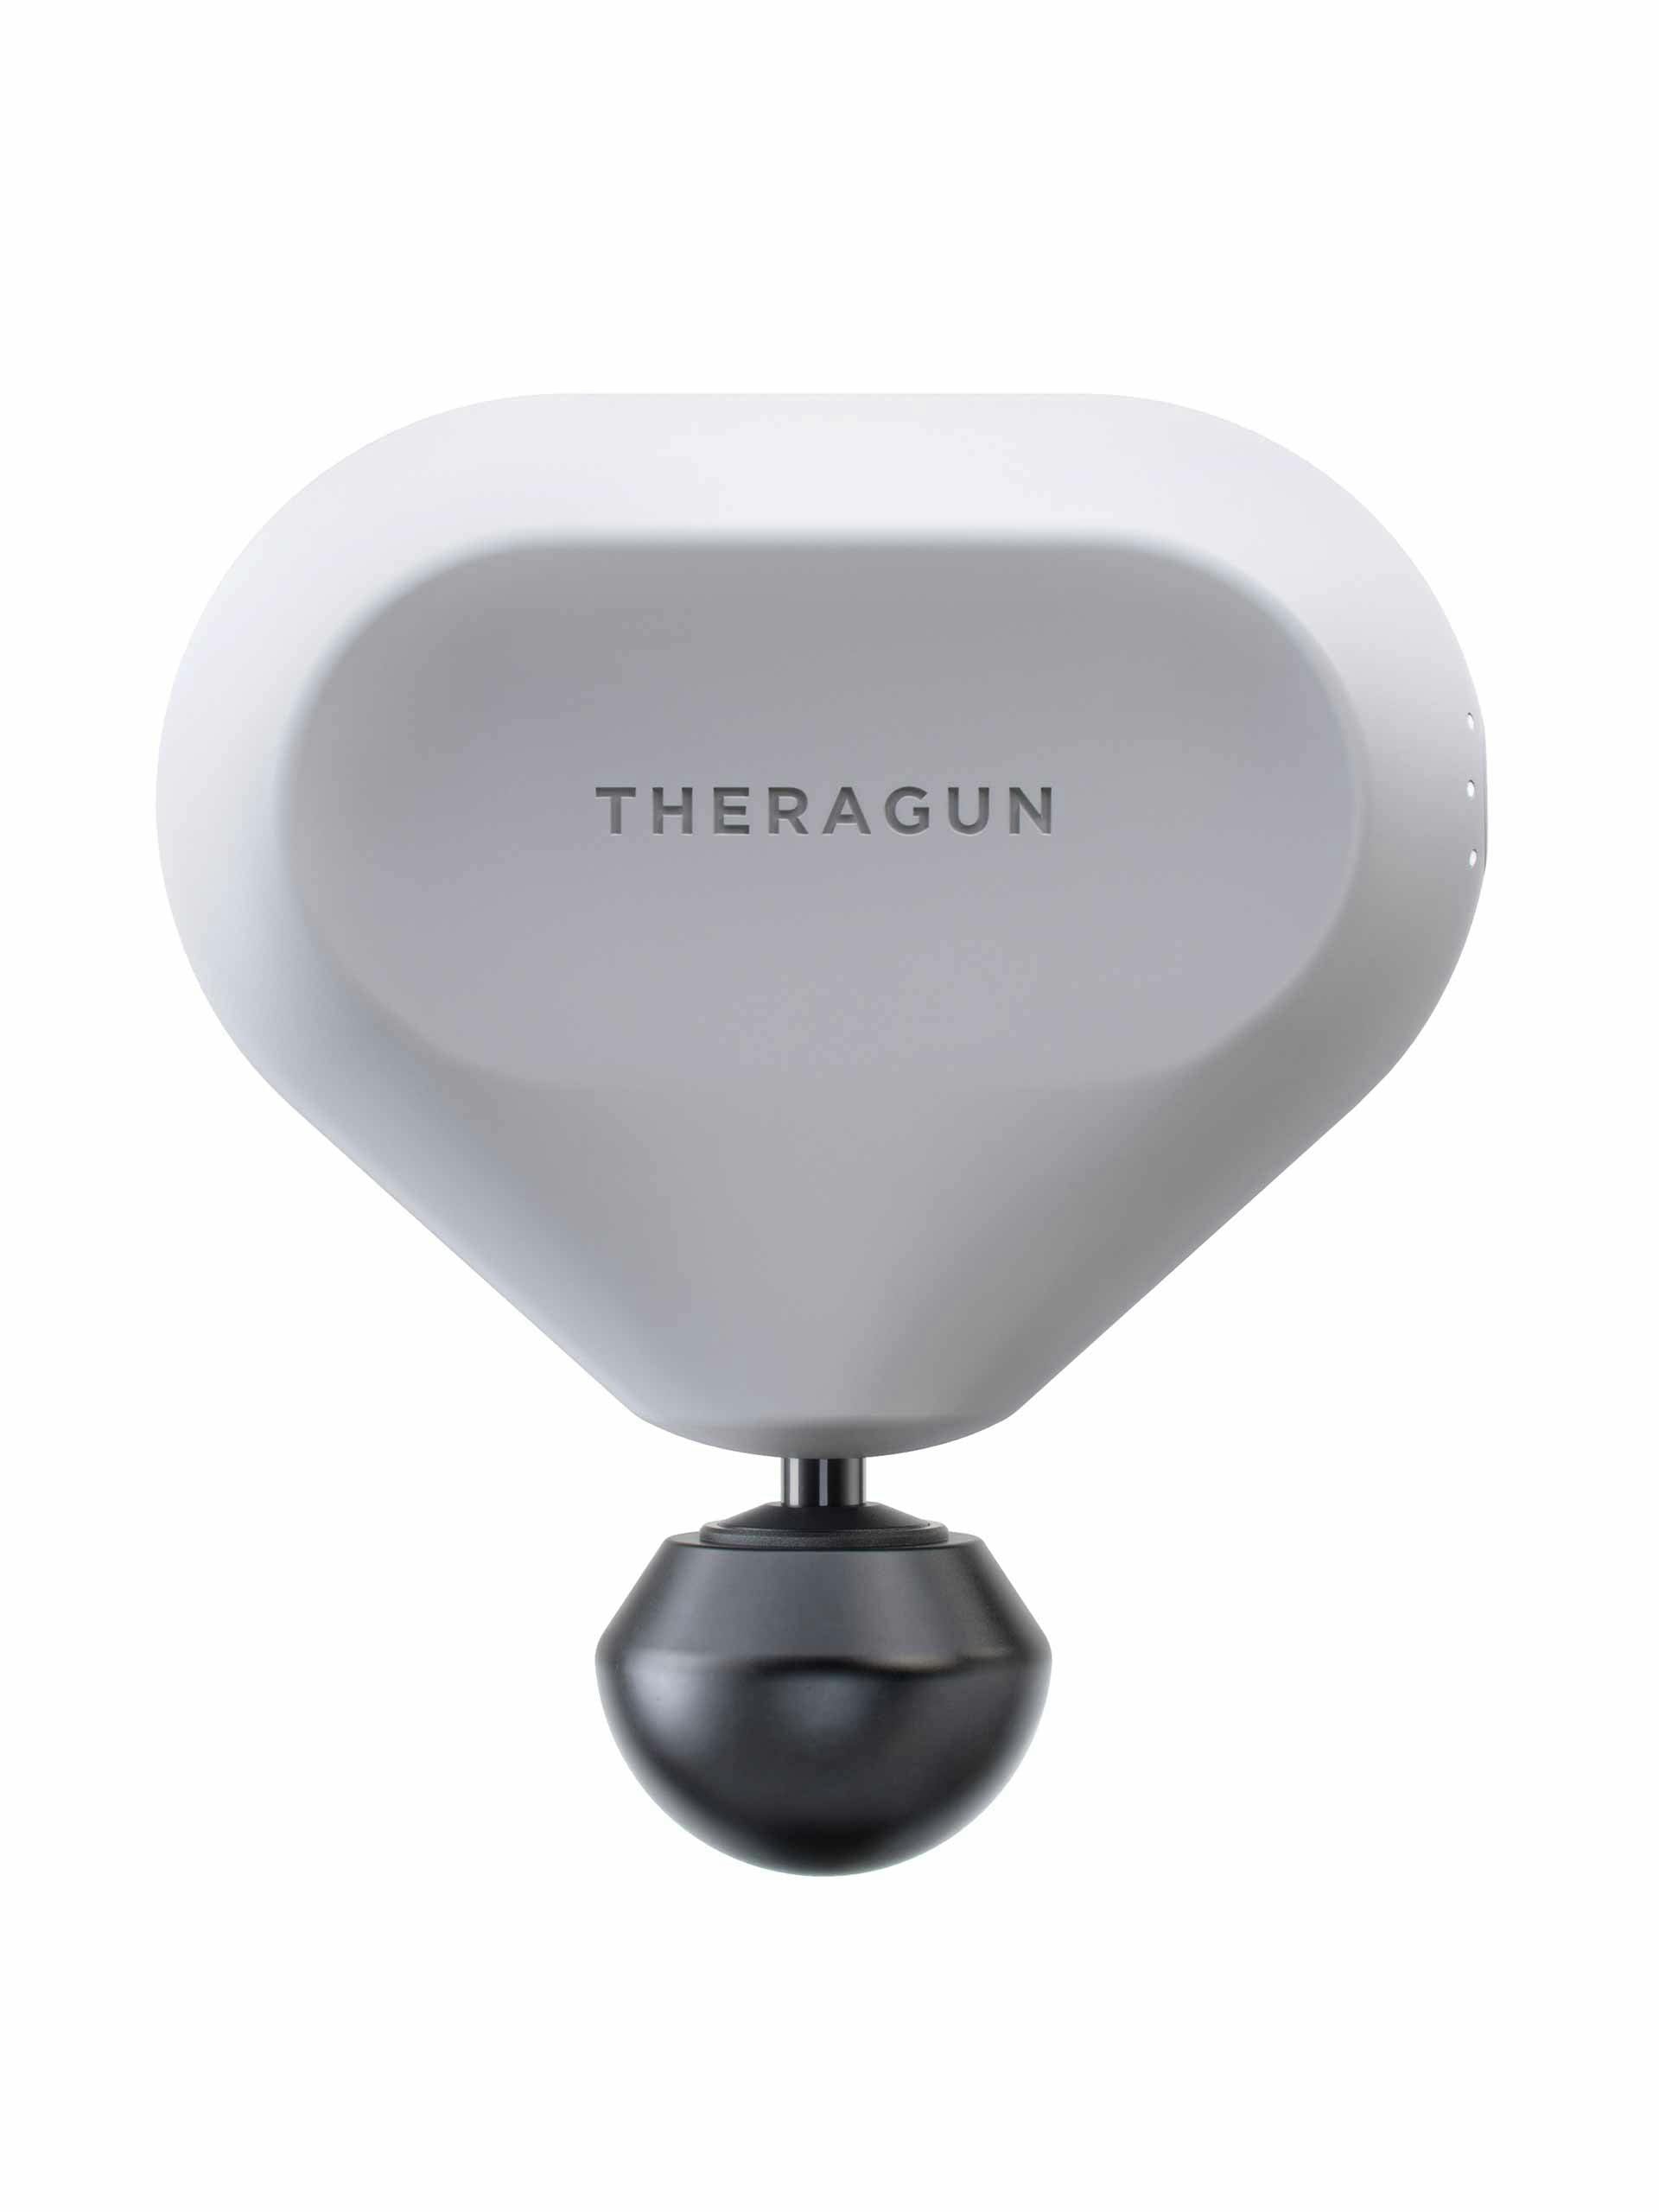 Therapy massager